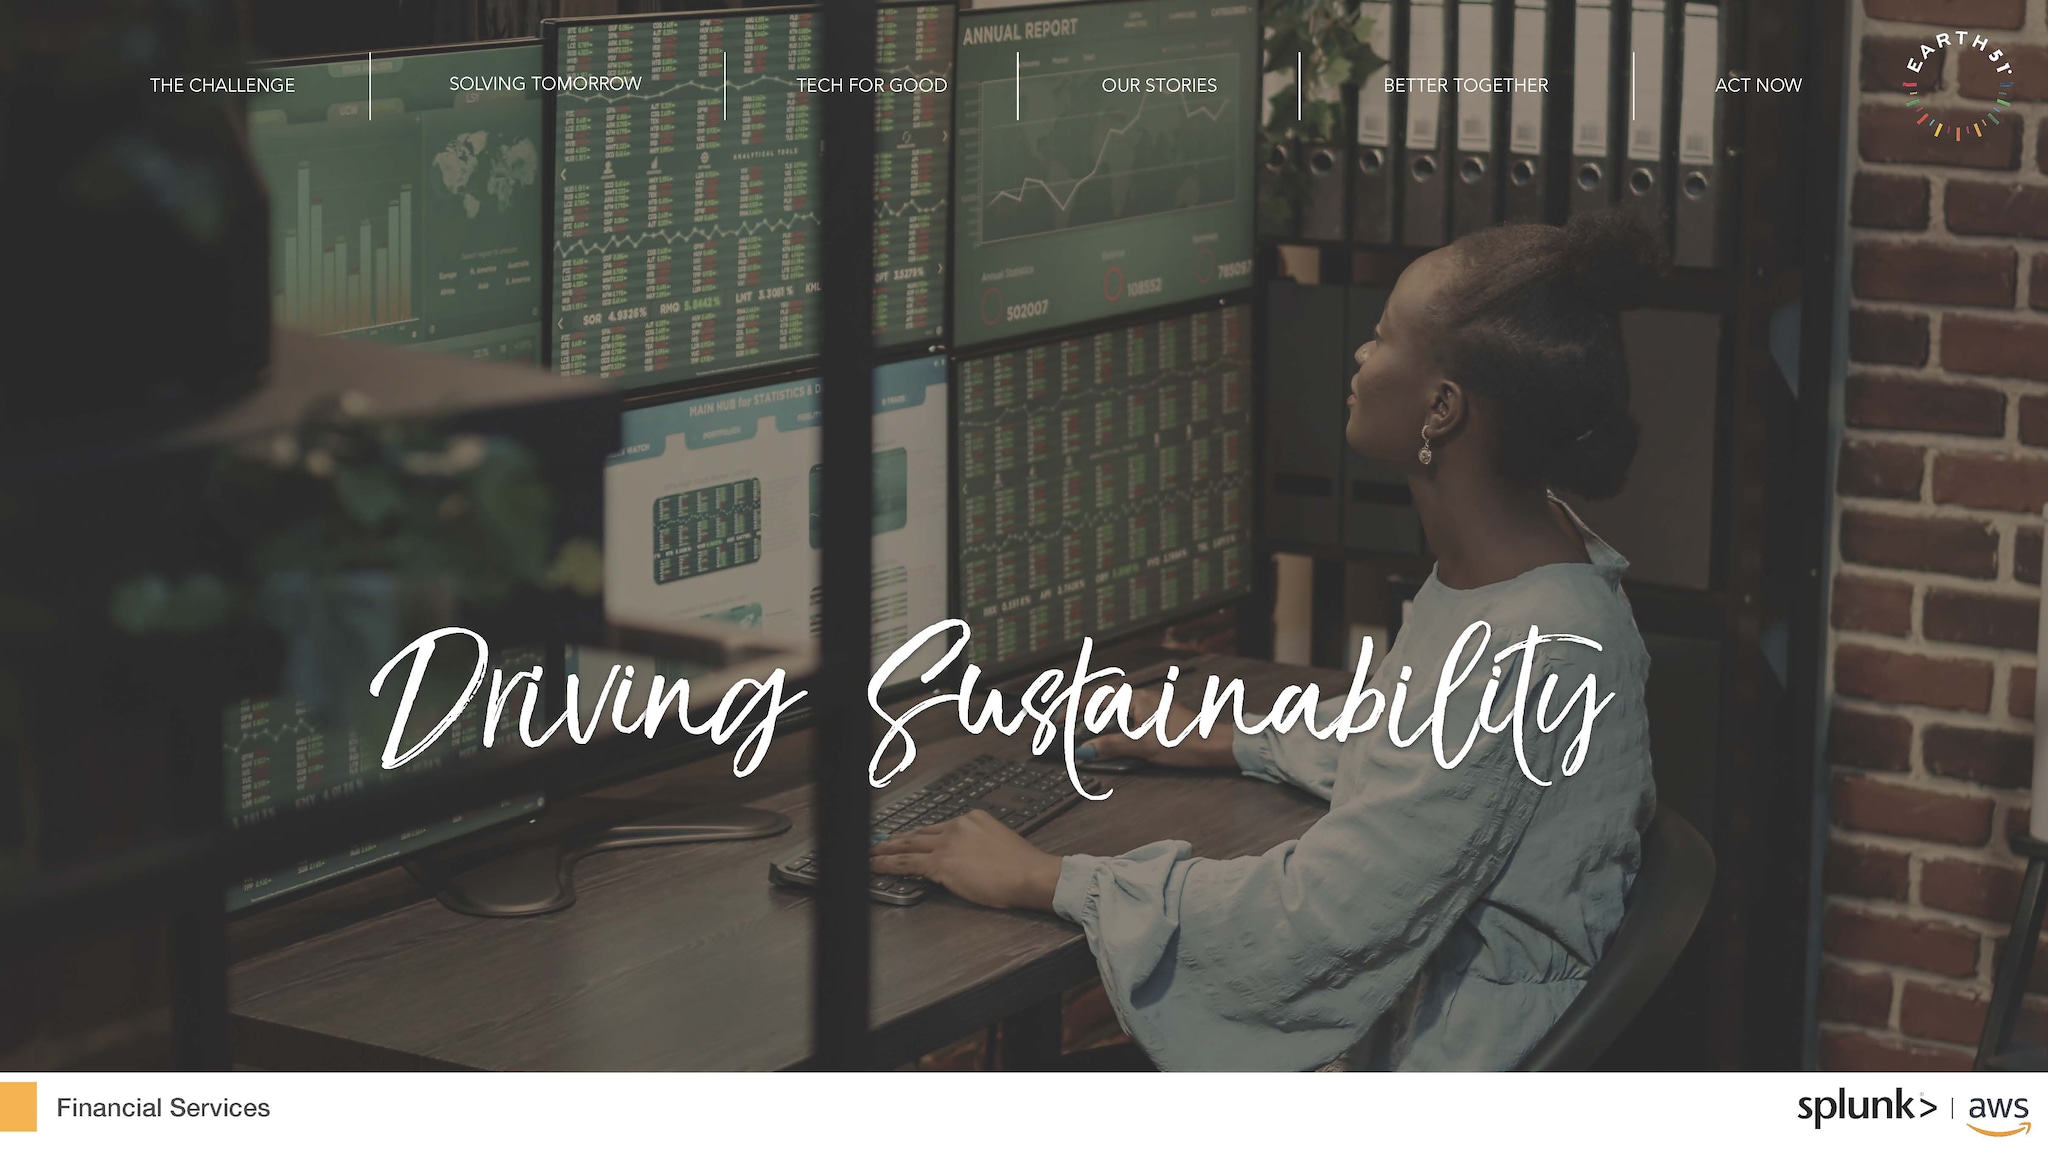 Sustainability Leadership in the Financial Services industry